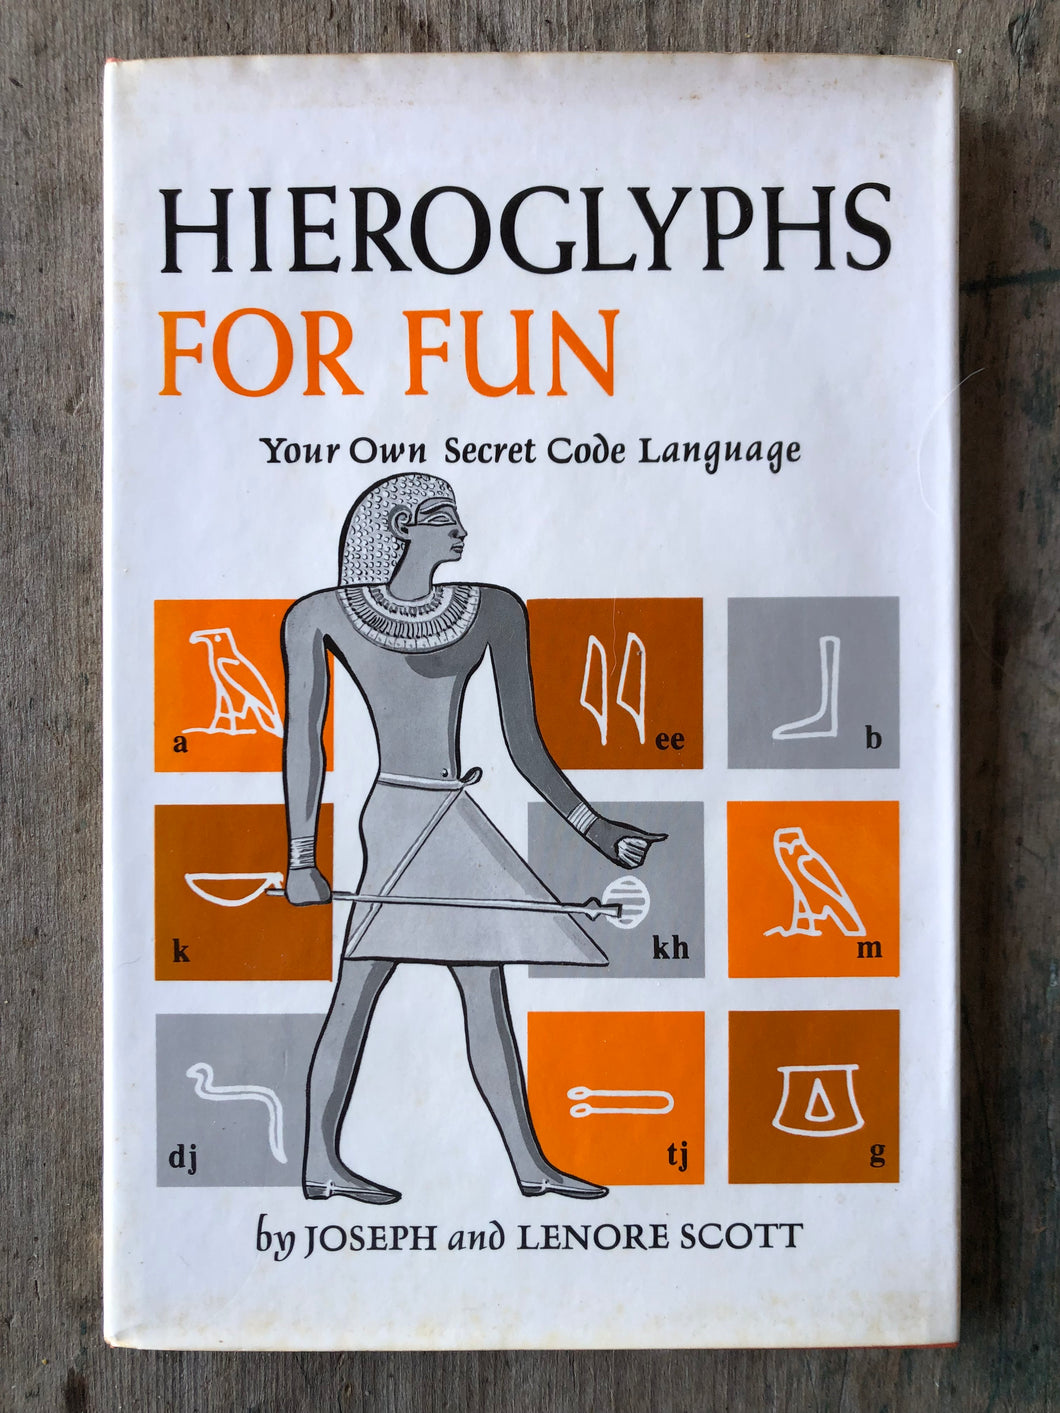 Hieroglyphs for Fun: Your Own Secret Code Language. by Joseph and Lenore Scott